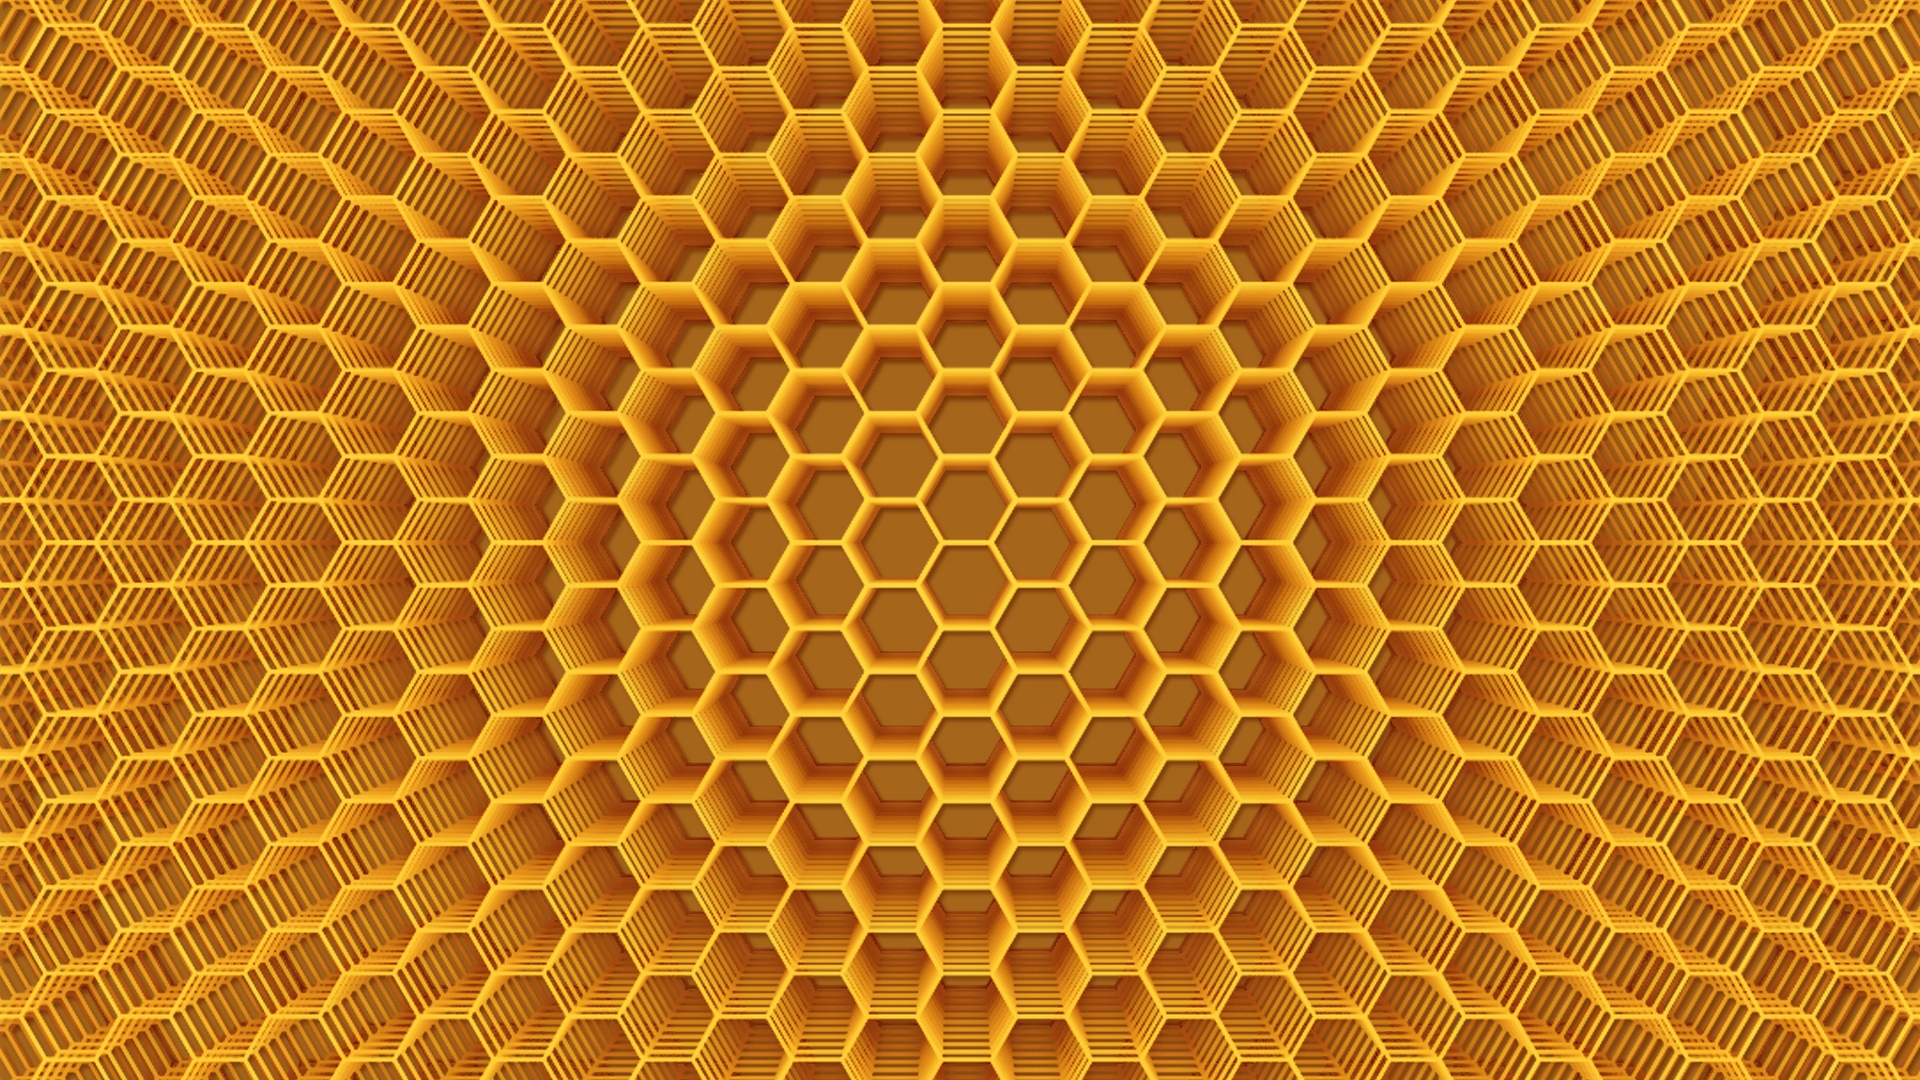 Abstract Honeycomb Structure for 1920 x 1080 HDTV 1080p resolution